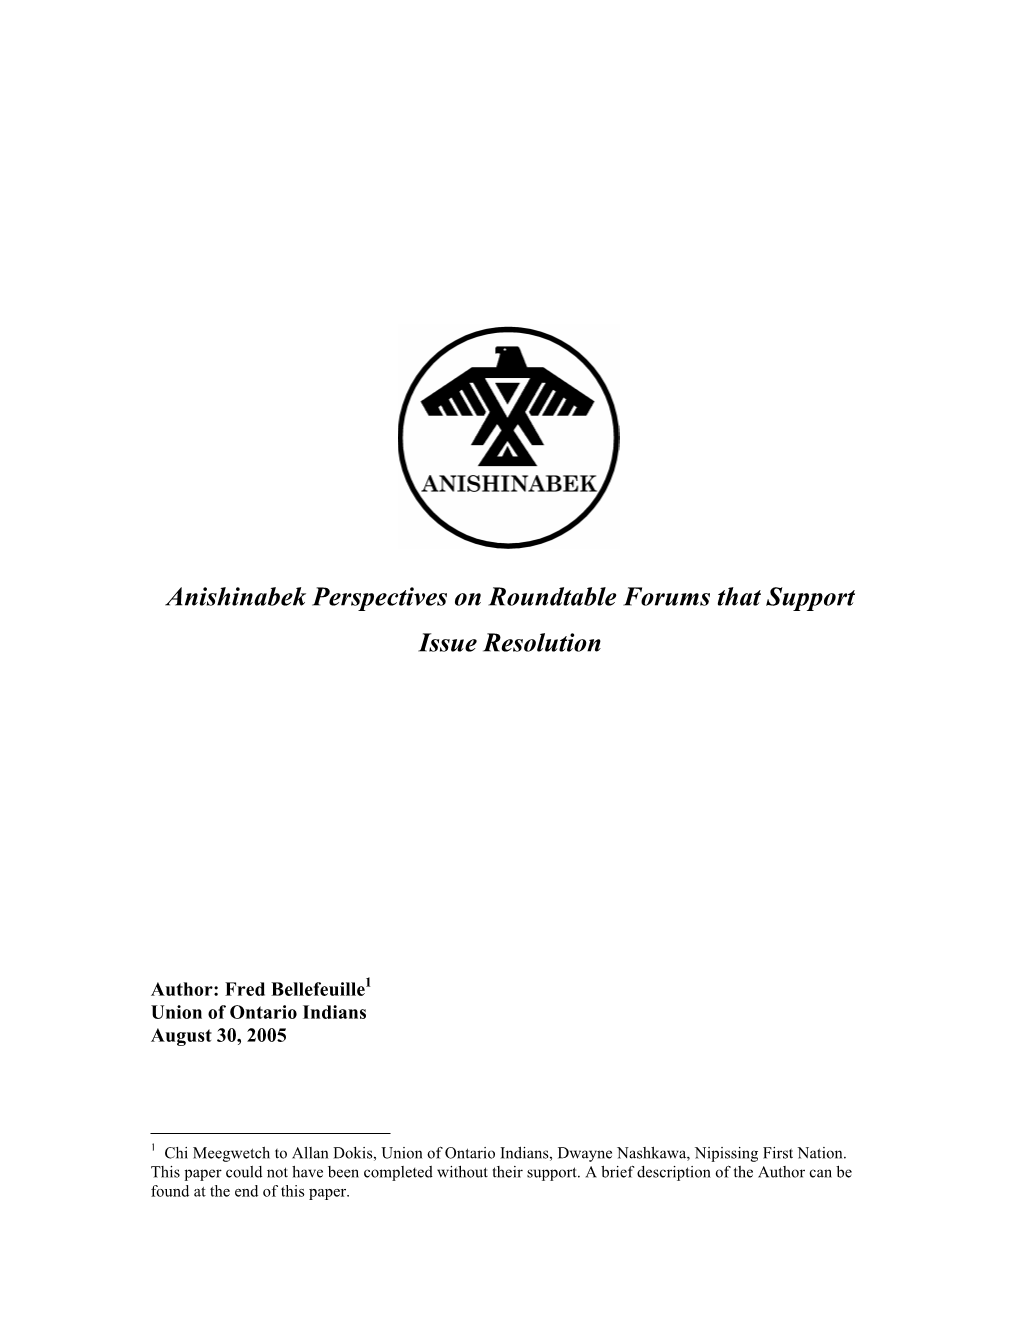 Anishinabek Perspectives on Roundtable Forums That Support Issue Resolution